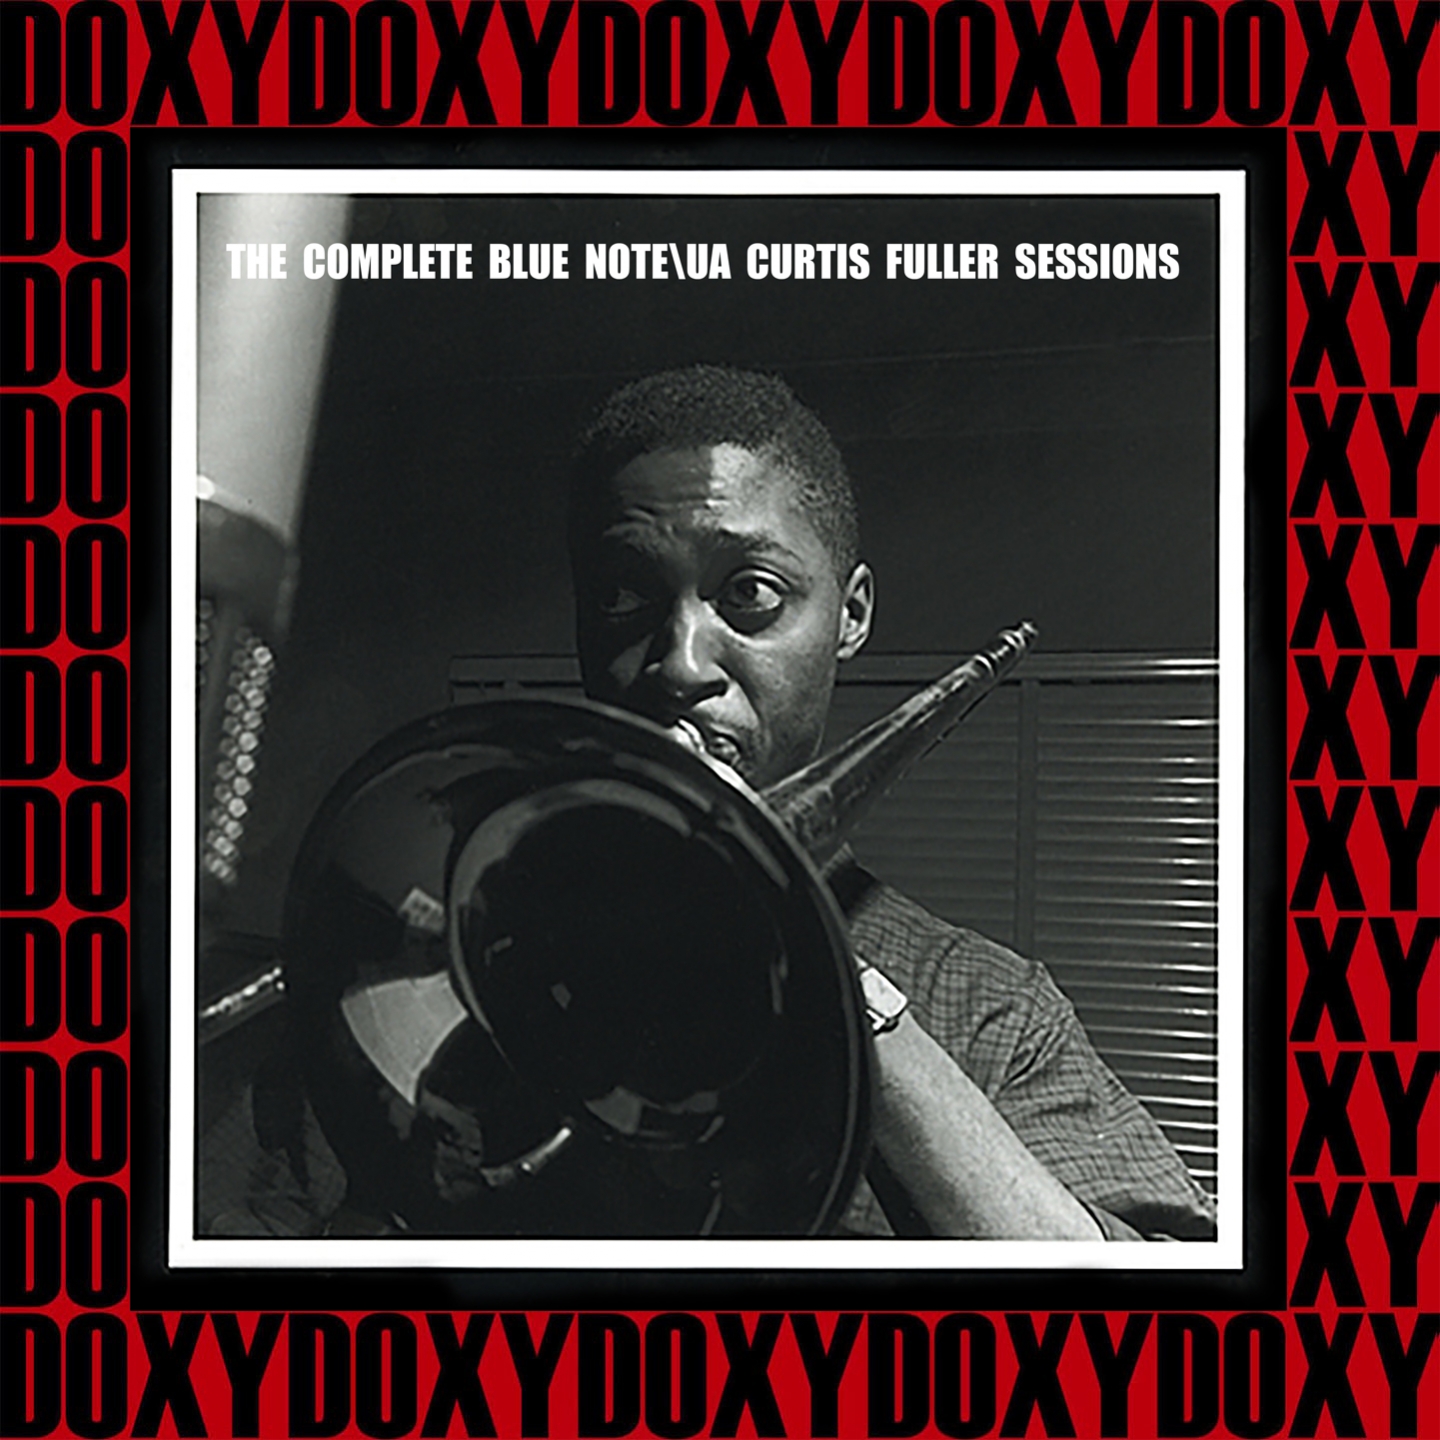 The Complete Blue Note/Ua Curtis Fuller Sessions (Hd Remastered Edition, Doxy Collection)